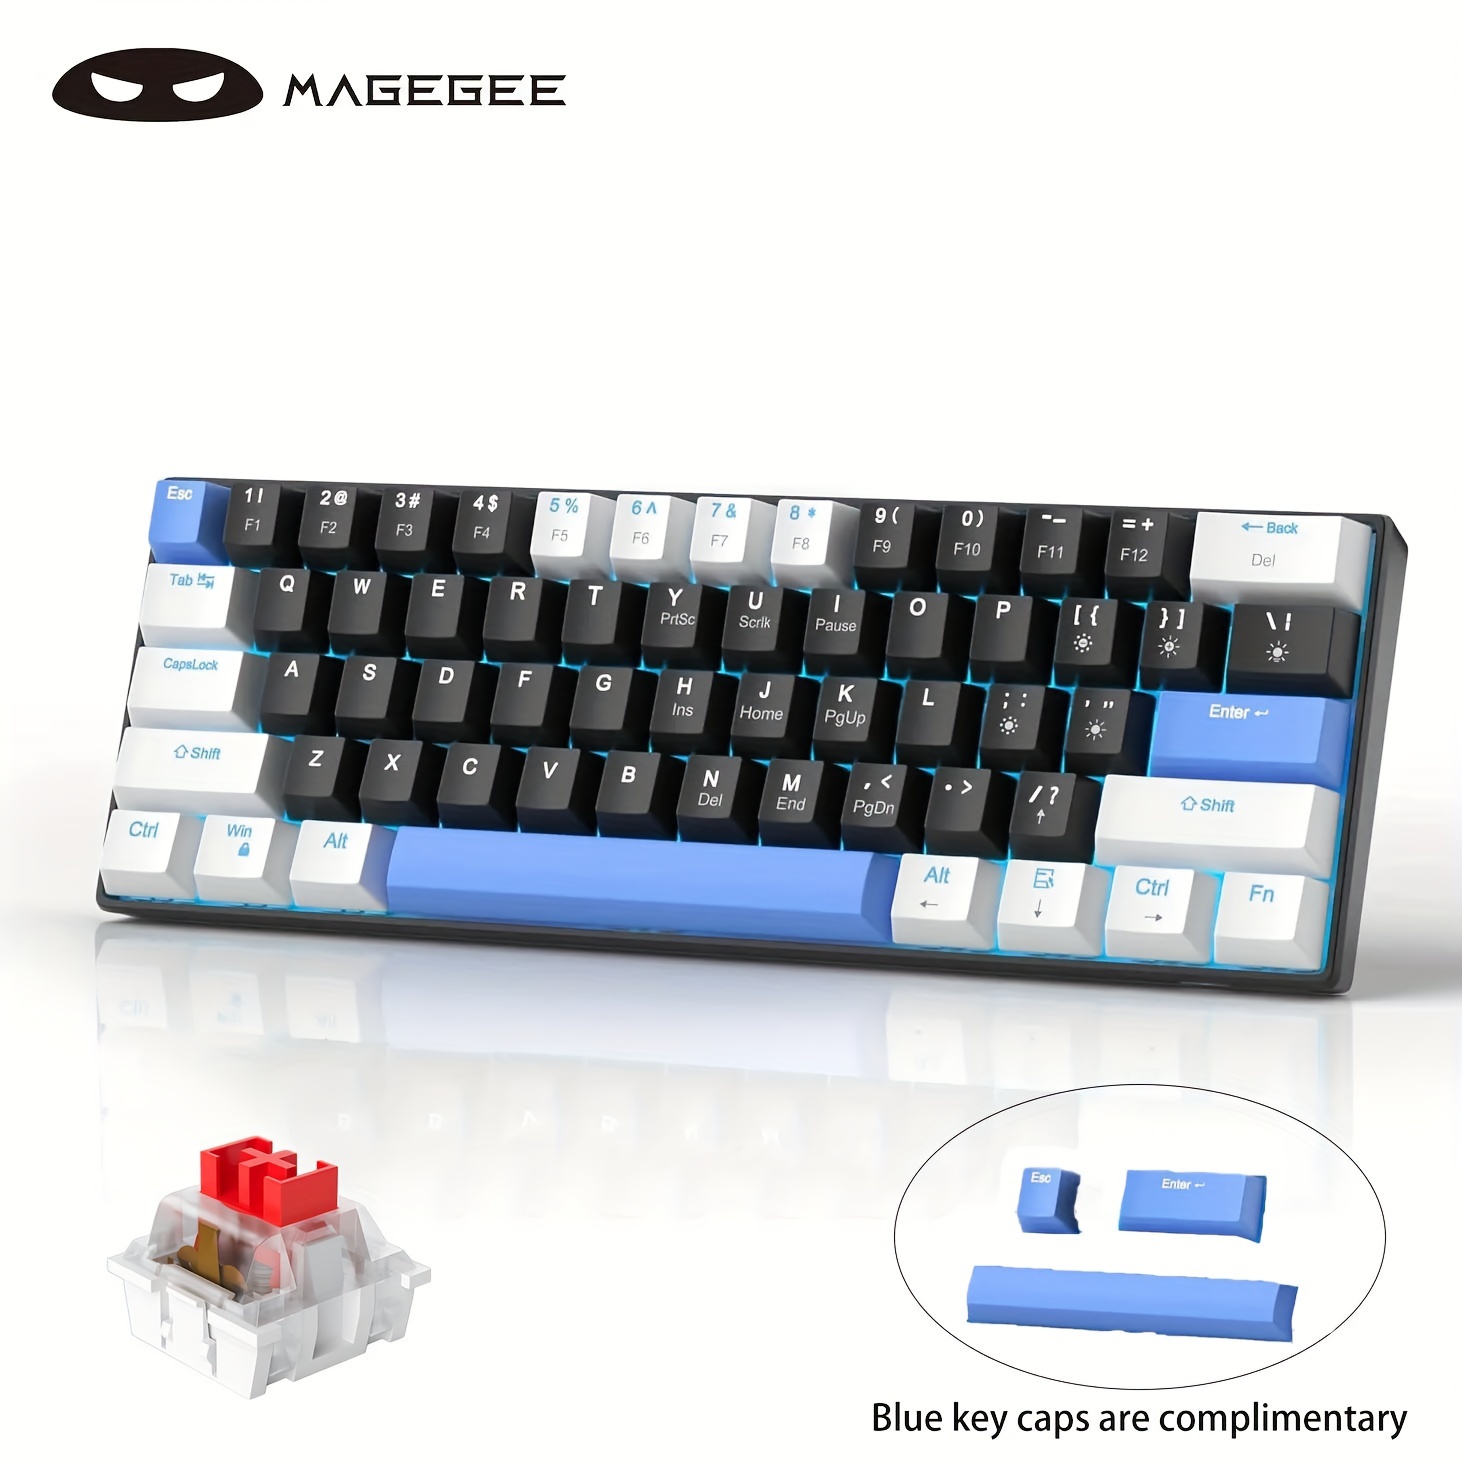 60 Percent Mechanical Gaming Keyboard, Black Gaming Keyboard with Red  Switches, Detachable Type-C Cable 60% Mini Keyboard with Powder Blue Light  for